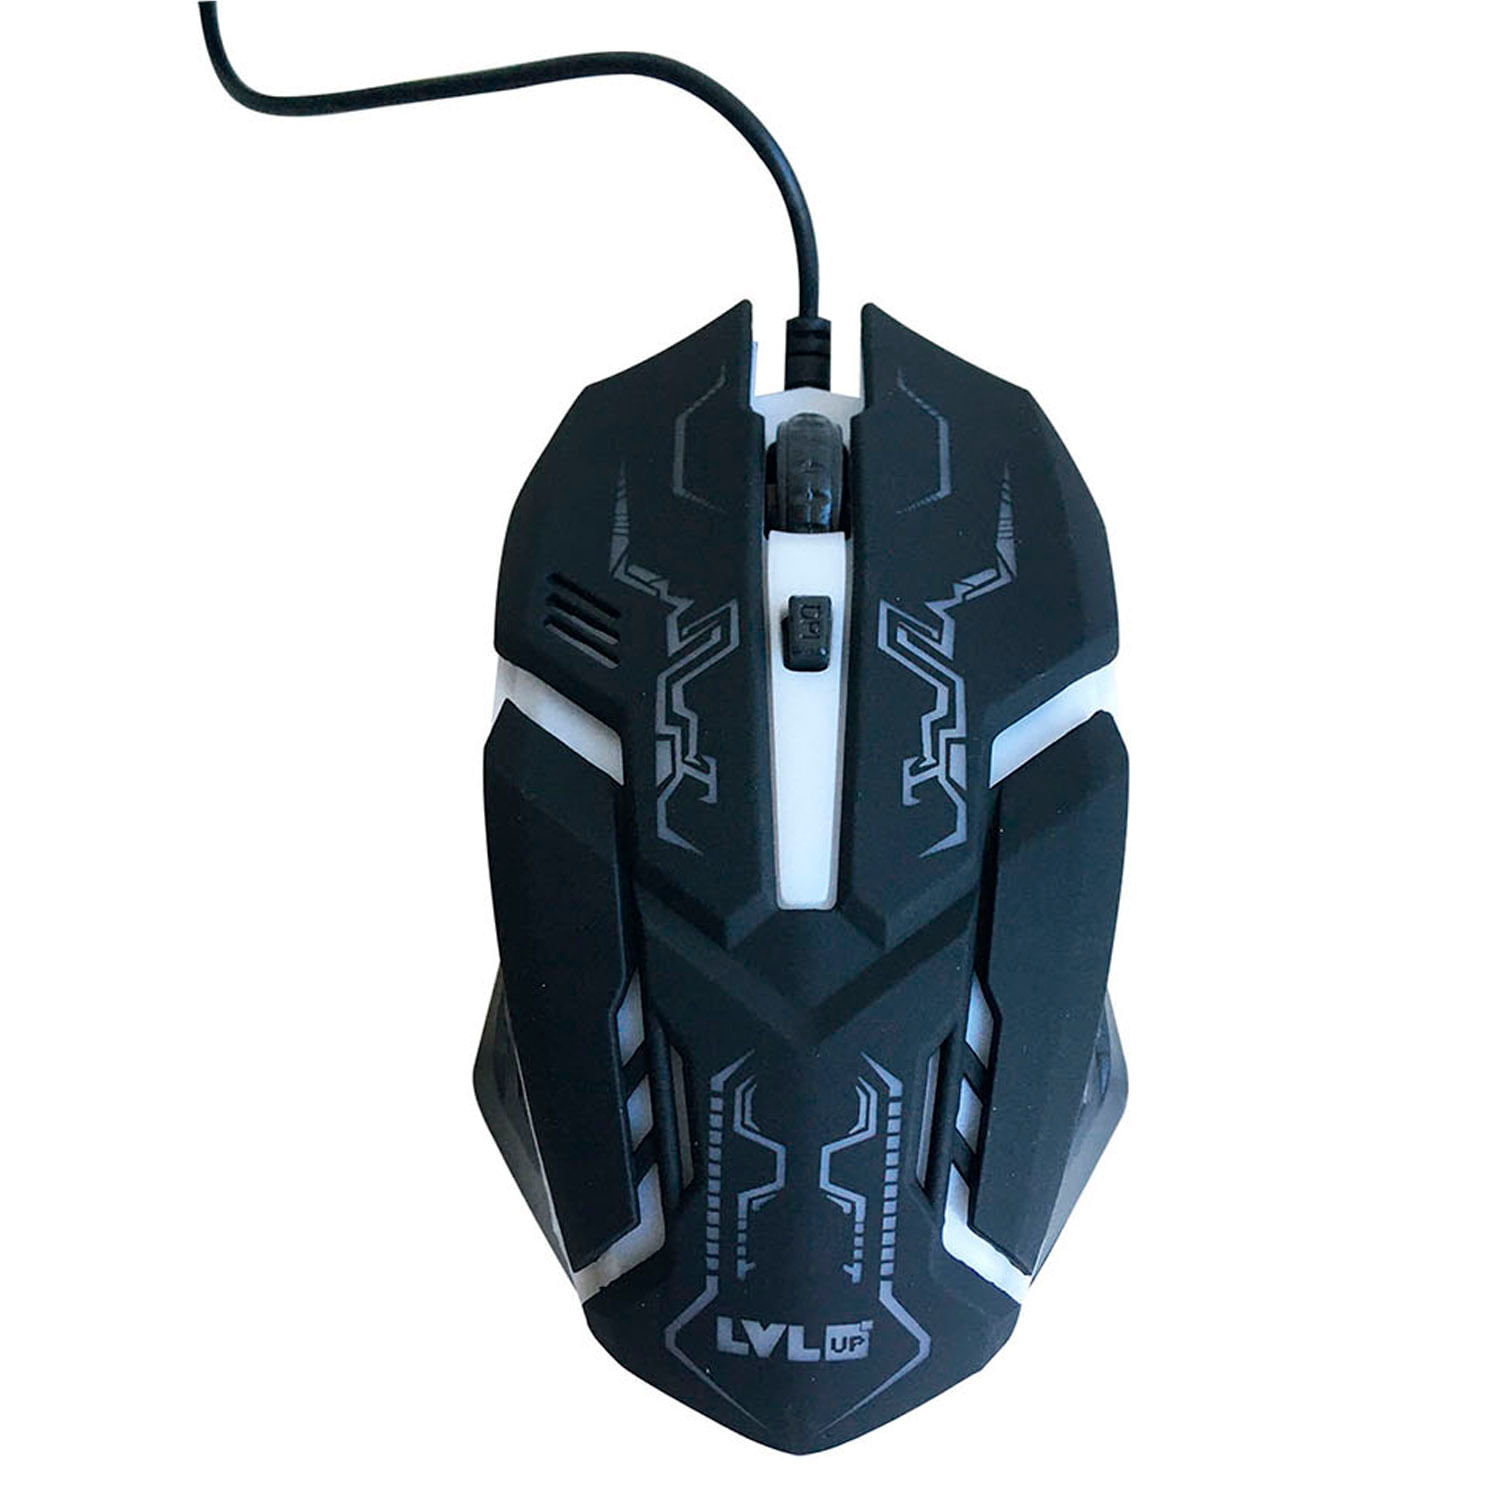 Mouse Gamer Lvlup Luces Rgb